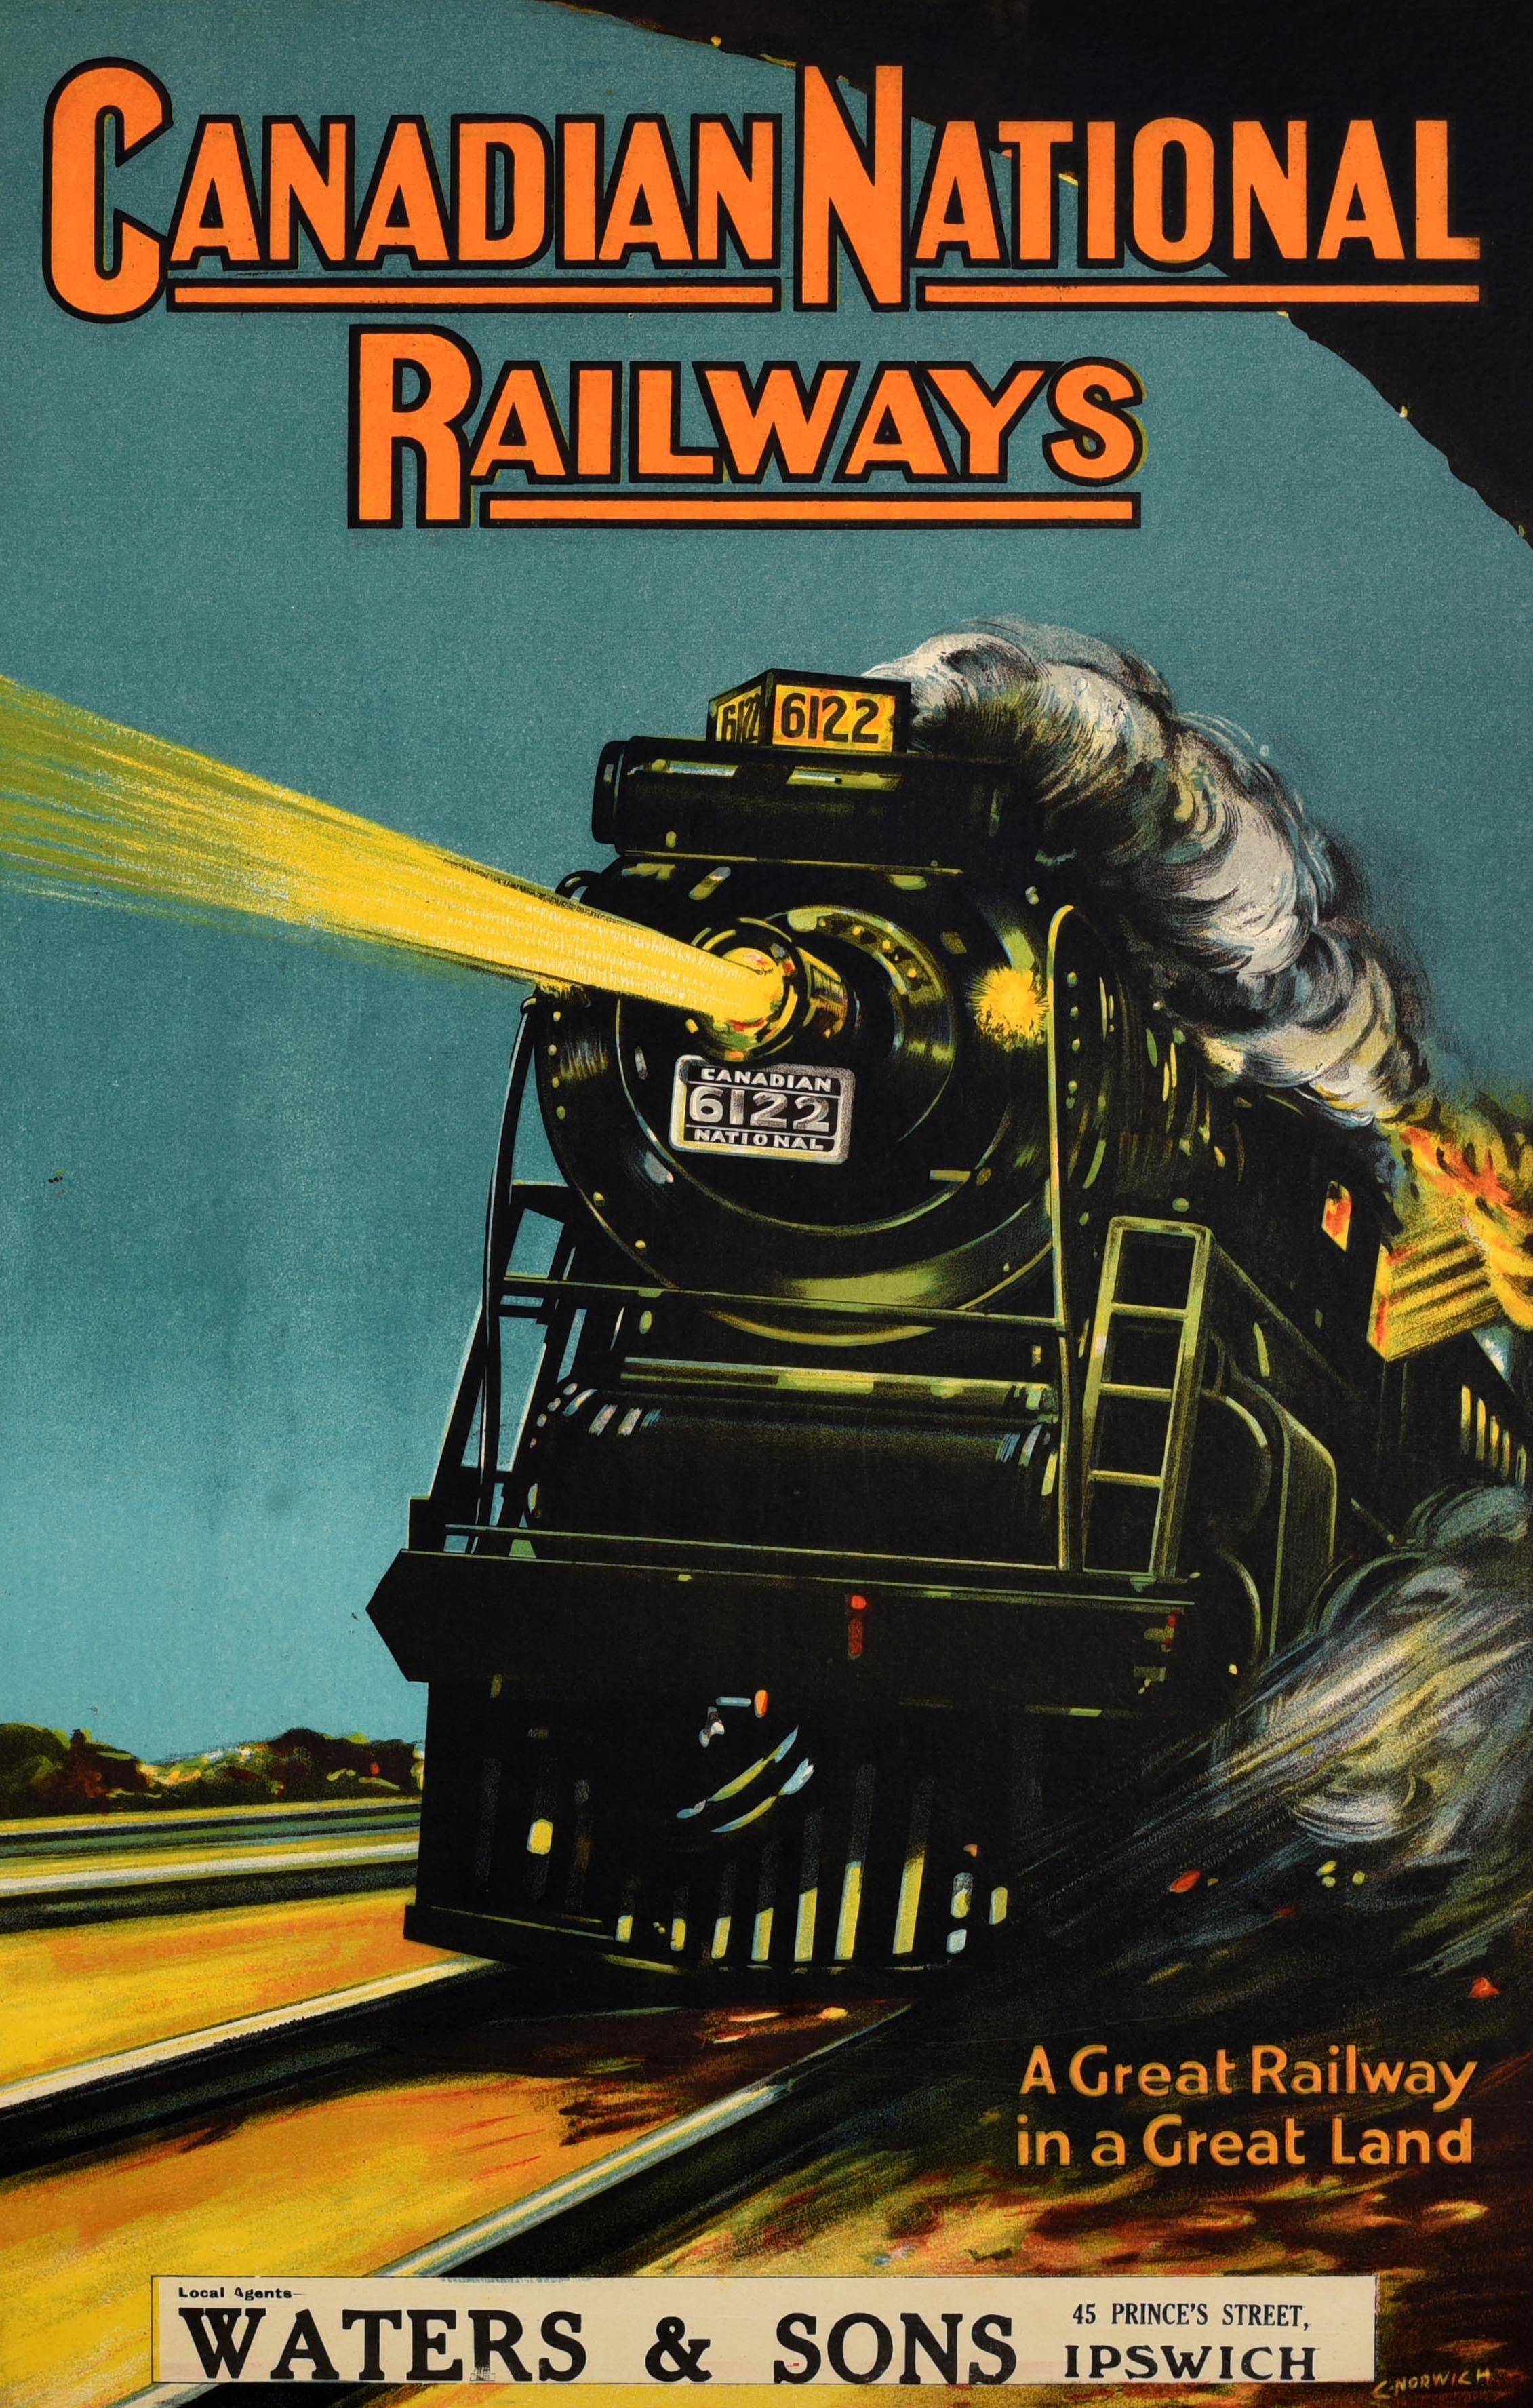 Original antique train travel advertising poster - Canadian National Railways A great railway in a great land - featuring a Canadian National 6122 steam locomotive train running at speed along the rail tracks at night with its lights shining out in